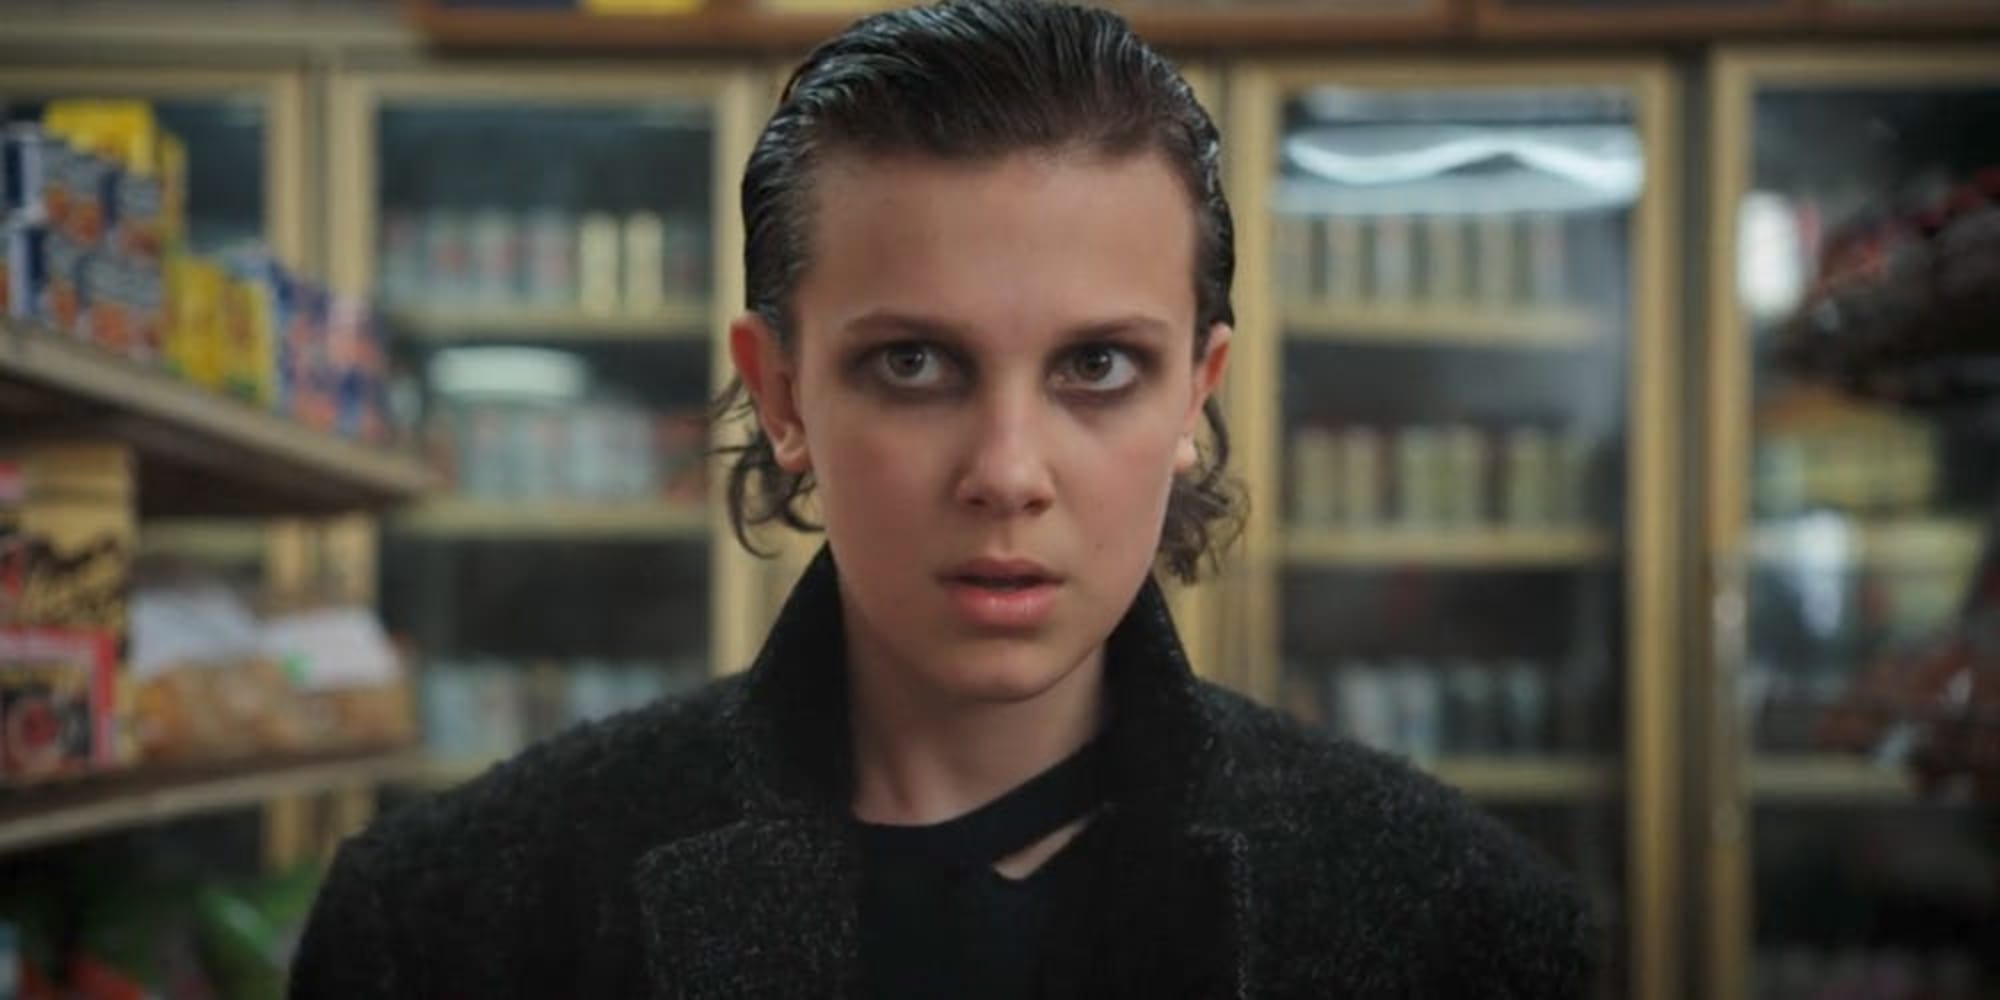 Stranger Things: What did Millie Bobby Brown really think about